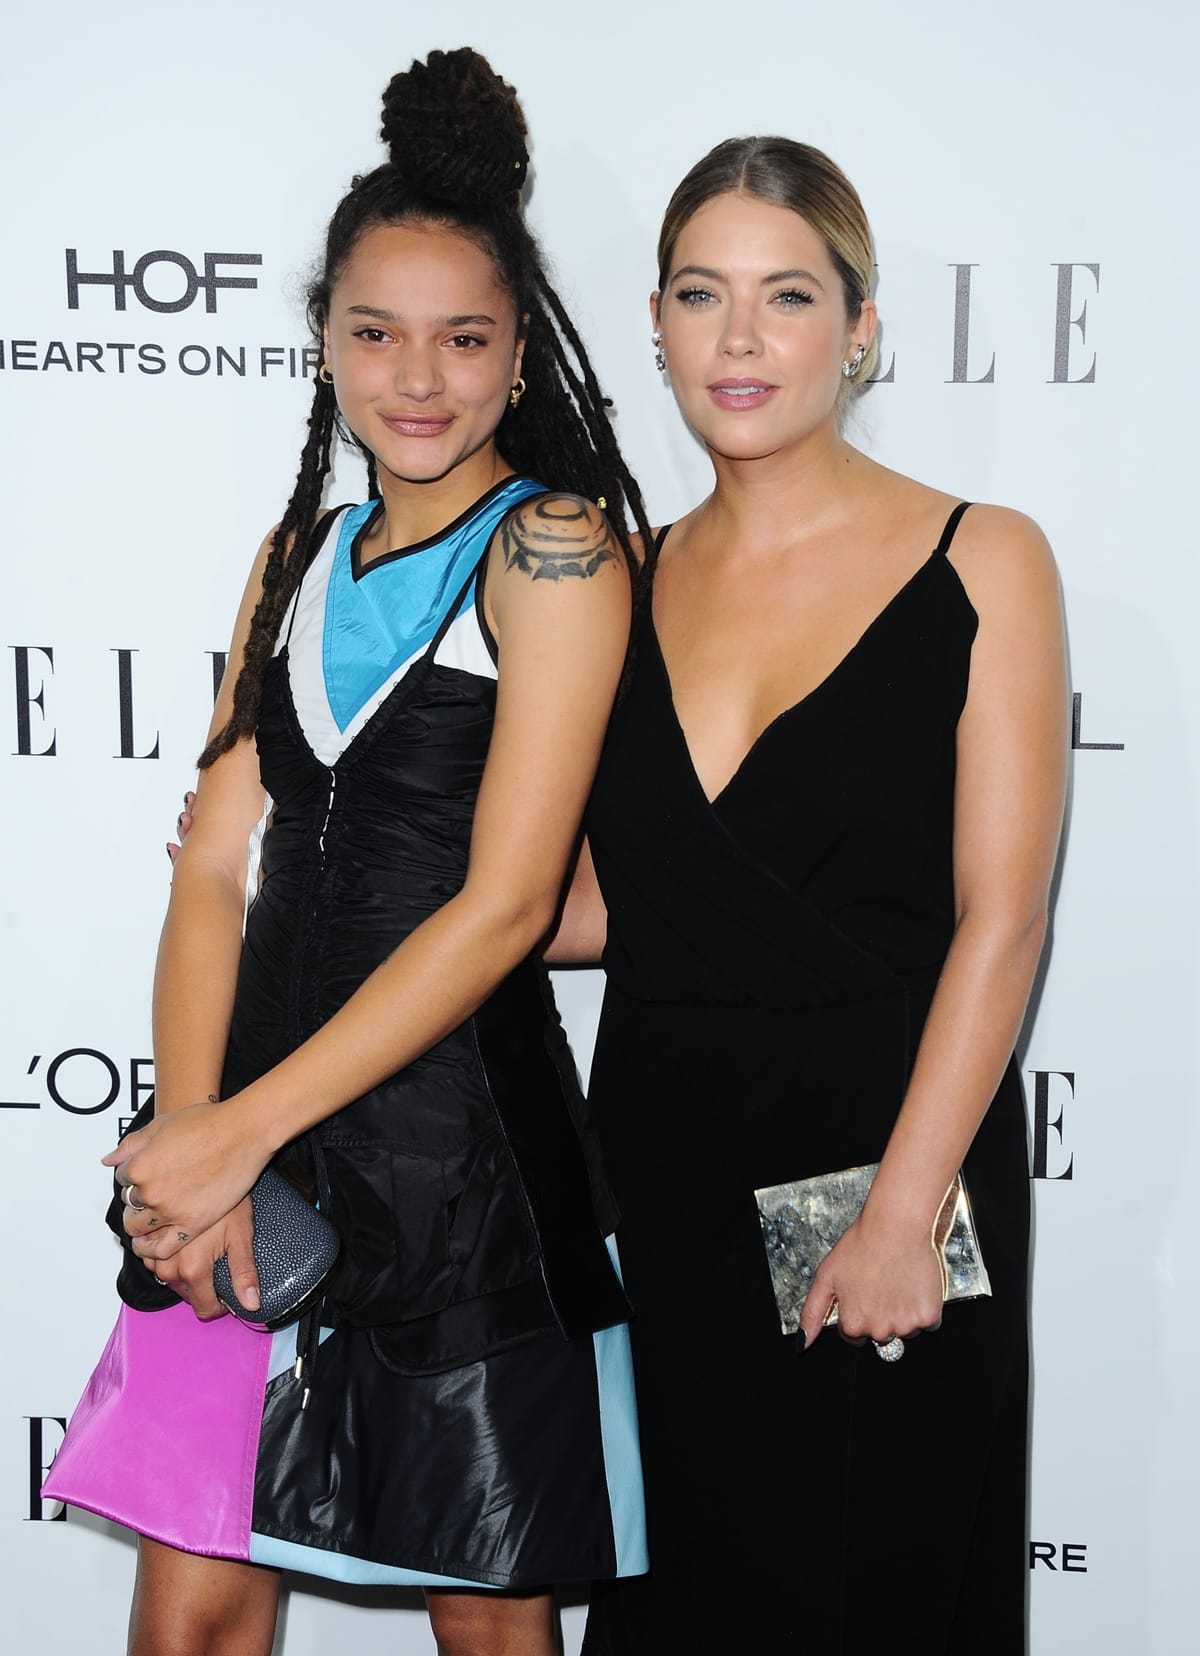 Her top knot hairstyle made Sasha Lane appear slightly taller than Ashley Benson at the 2016 Elle Women In Hollywood Awards